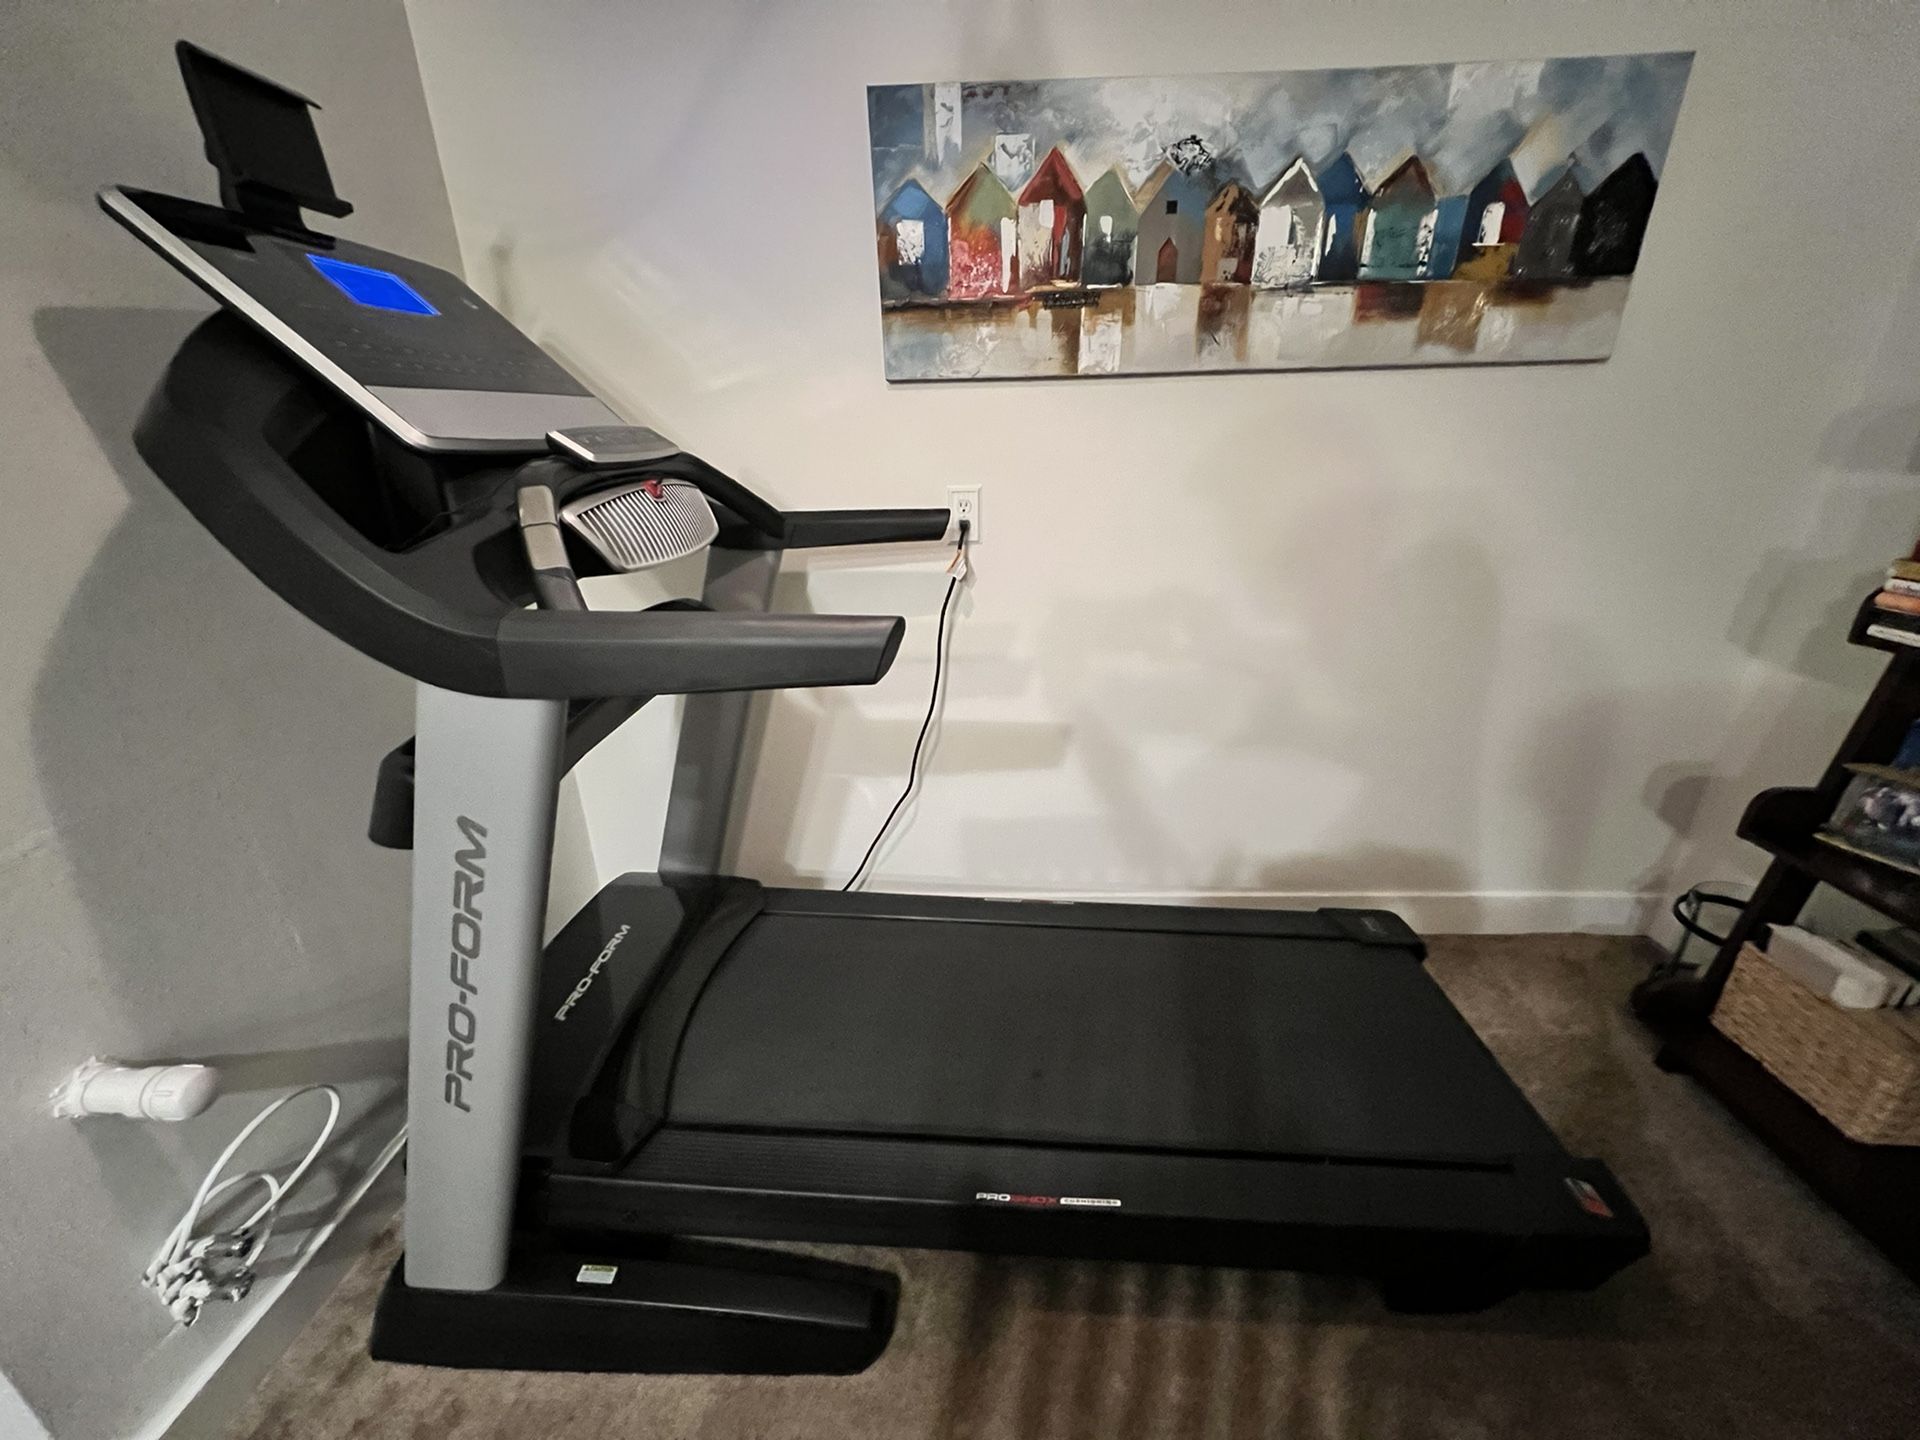 Pro-Form Pro 2000 Treadmill - Single owner ($1,269 Retail, 4 Years Old)